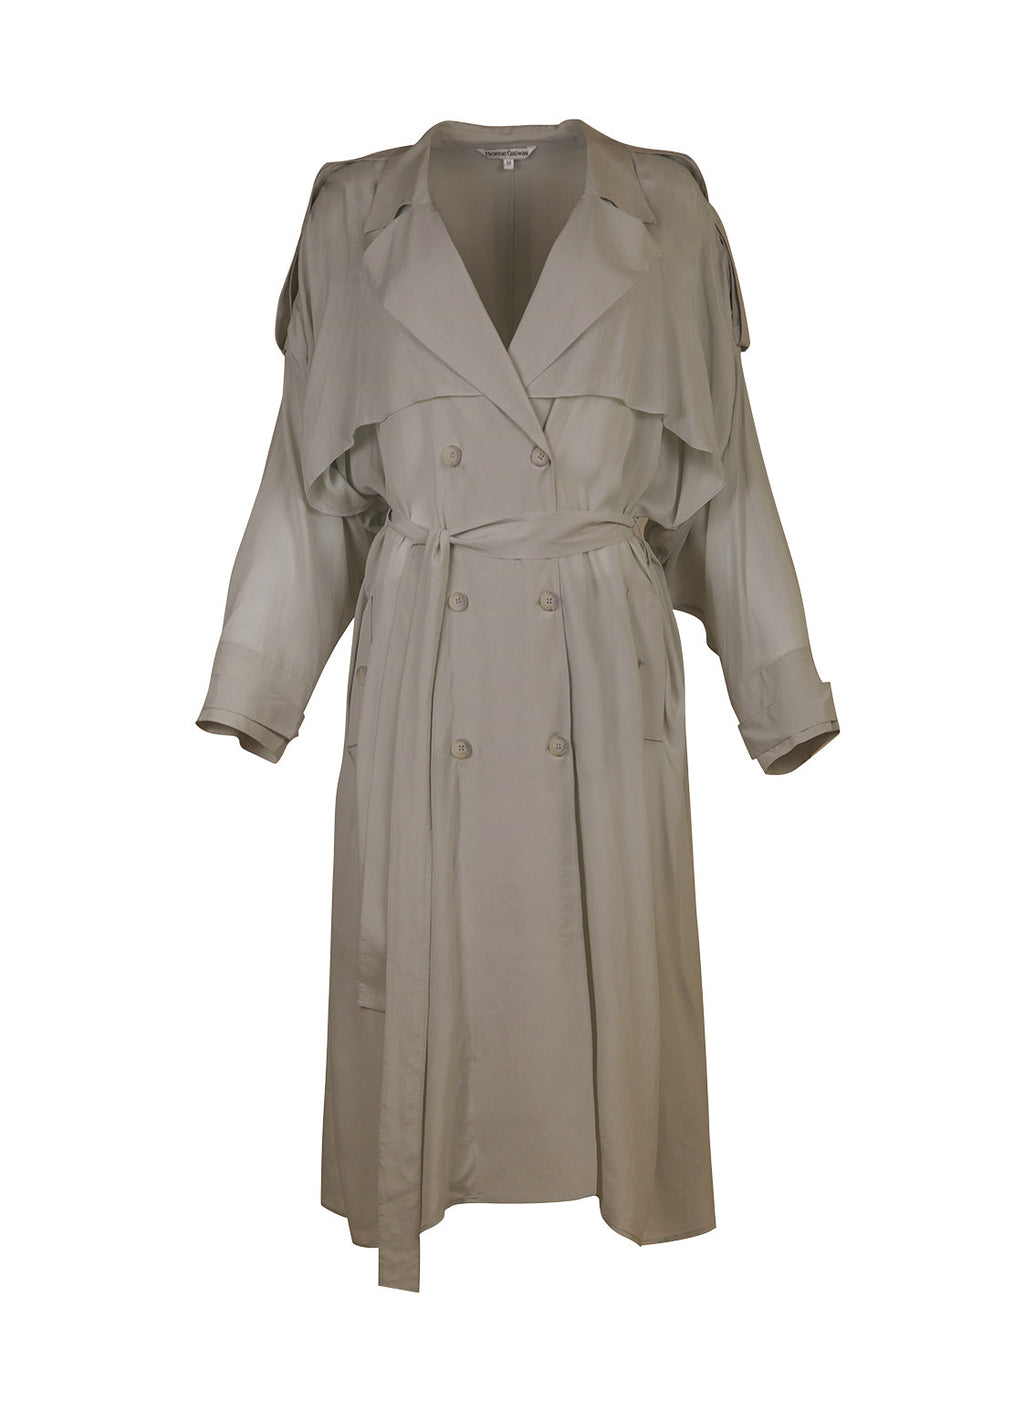 Trench coat with belt, shoulder and back collars